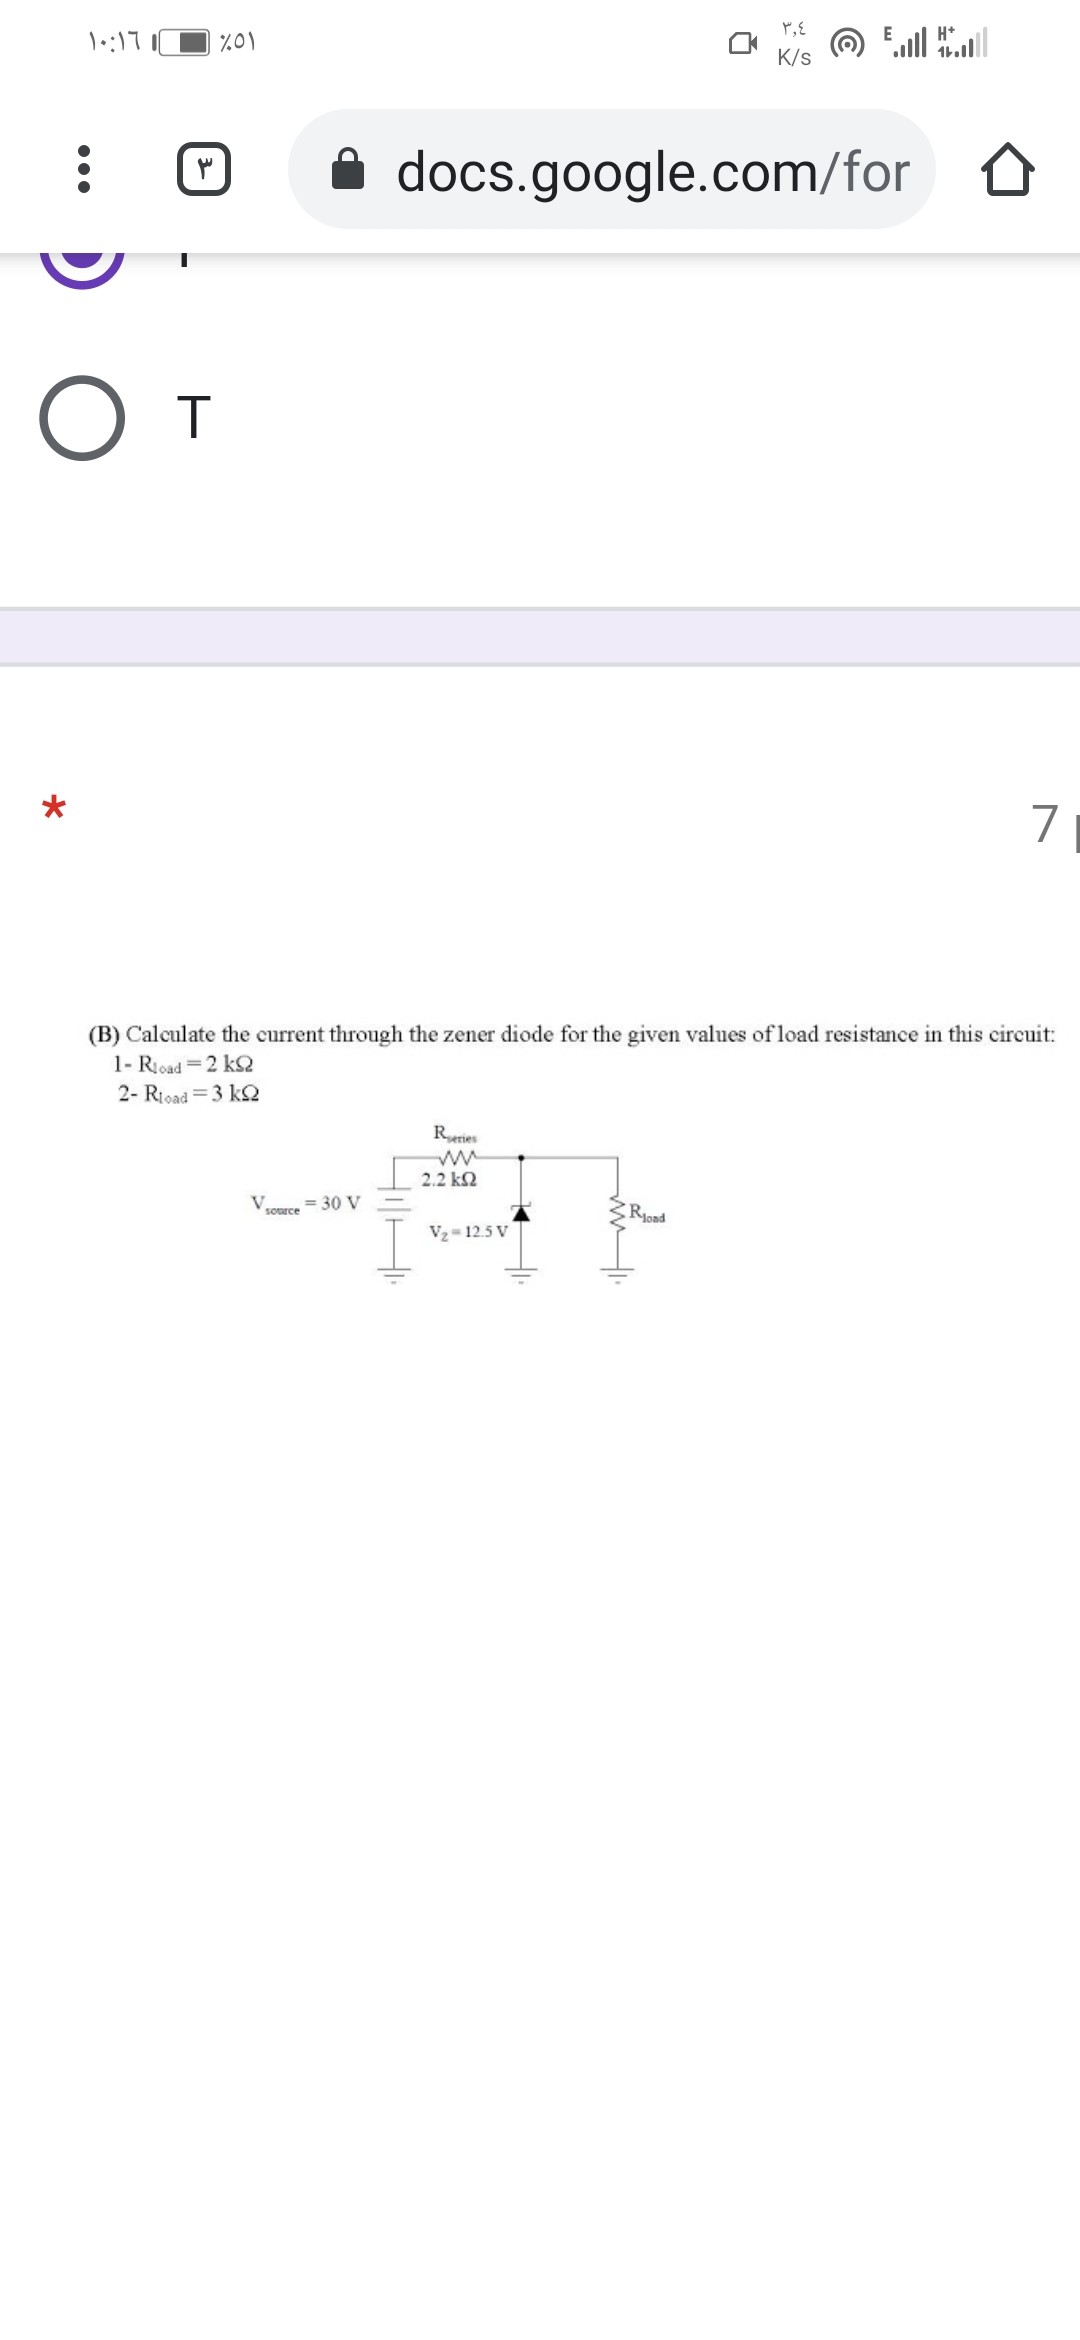 %01
K/s
docs.google.com/for
От
*
7
(B) Calculate the current through the zener diode for the given values of load resistance in this circuit:
1- Rioad =2 k
2- Rioad =3 kS
Reries
2.2 k2
V.
Sorce
= 30 V
Rond
V2= 12.5 V
